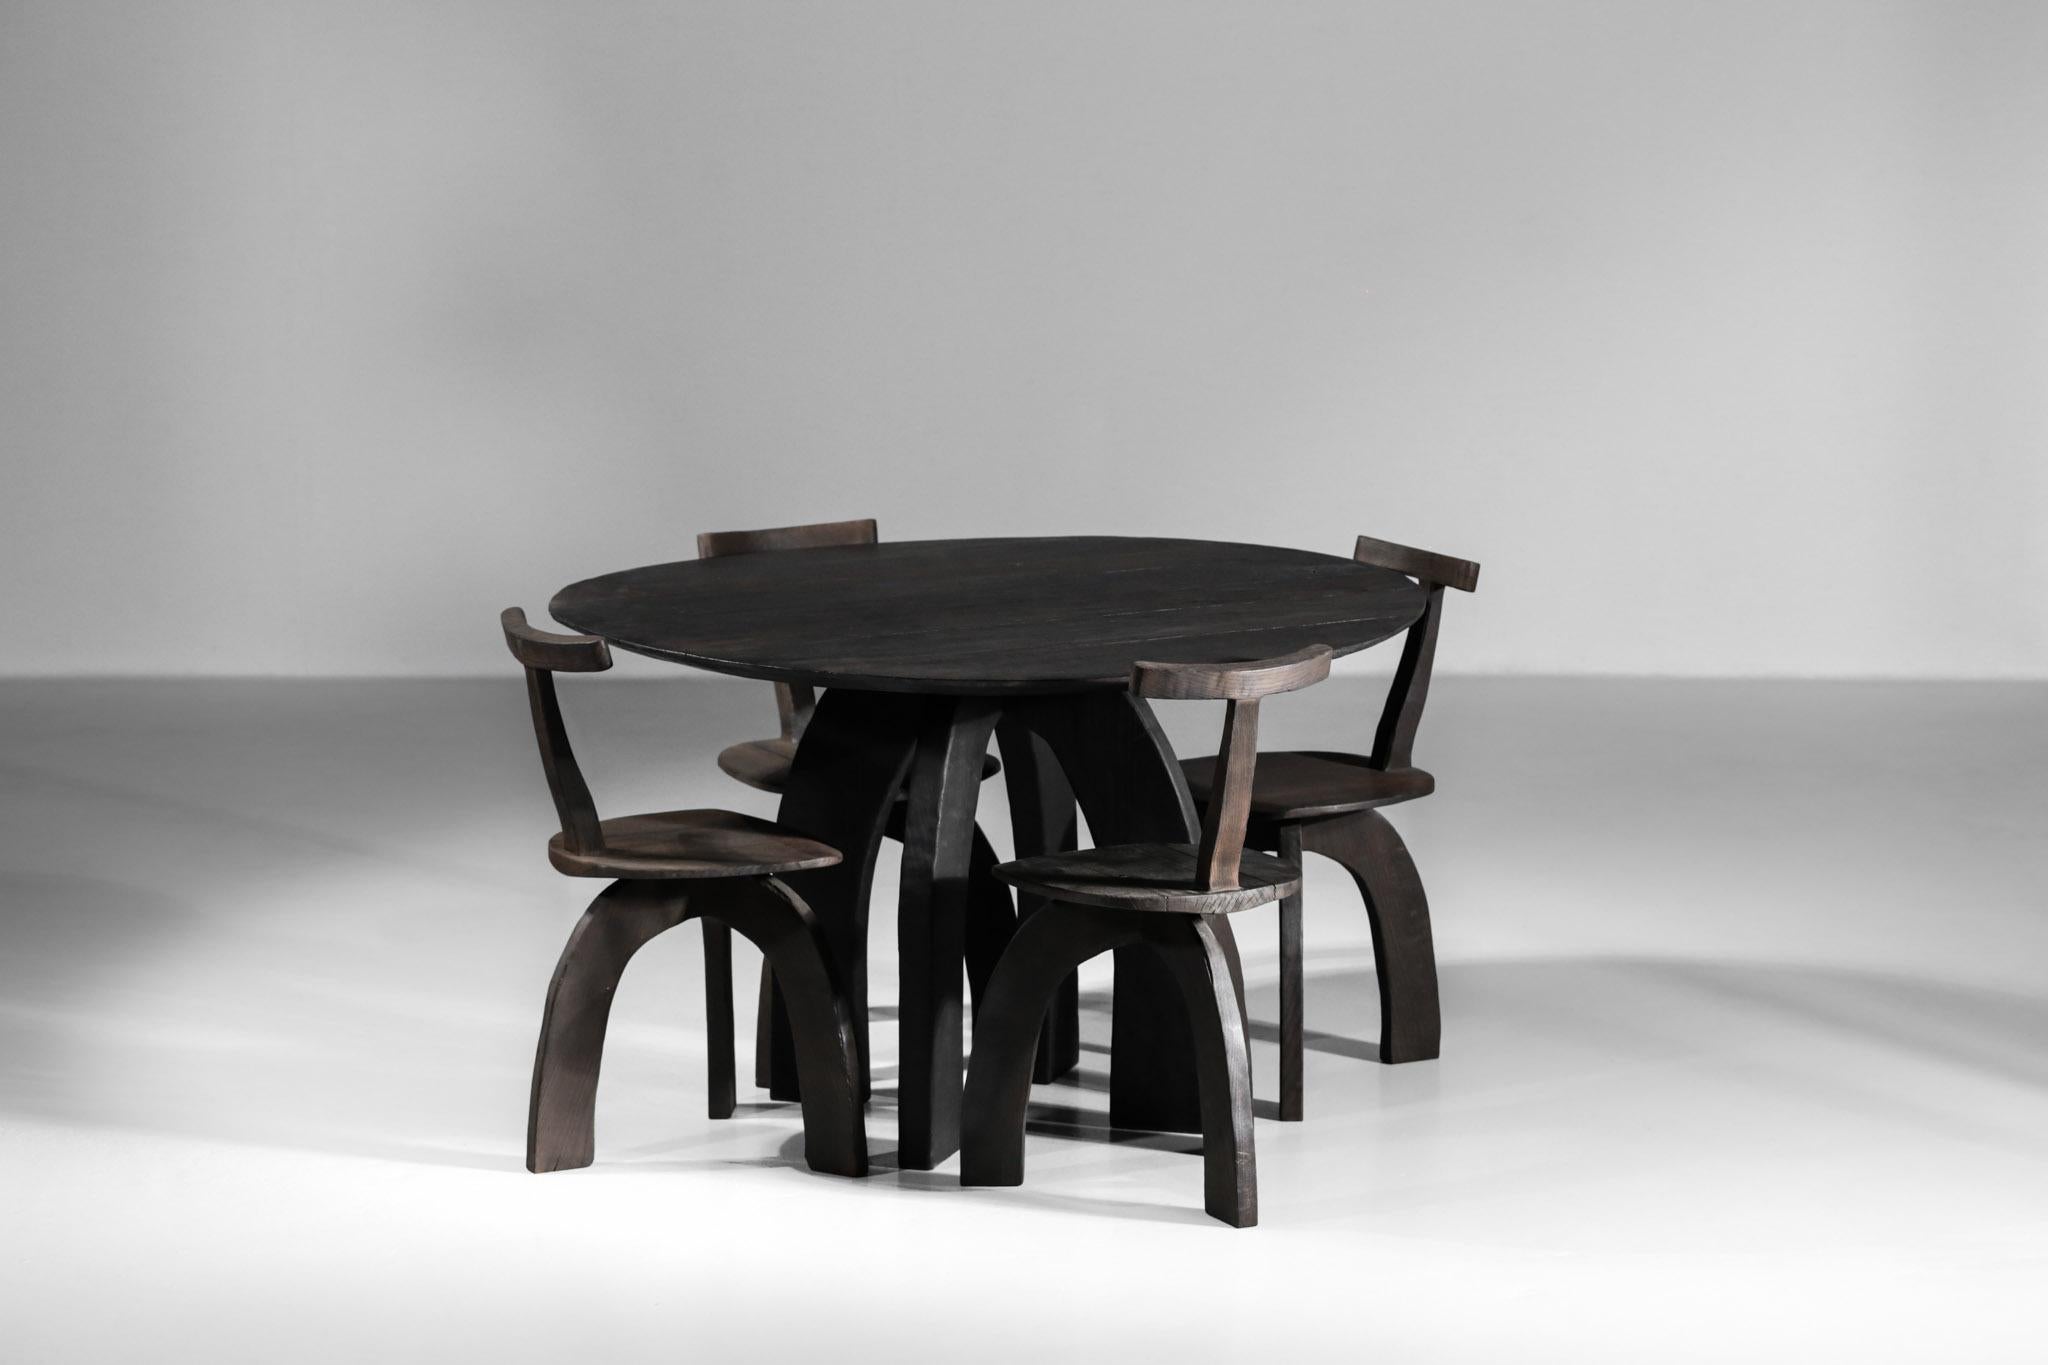 French Artisanal Dining Set Round Table and Chairs by Vincent Vincent 80/20 Burnt Wood For Sale